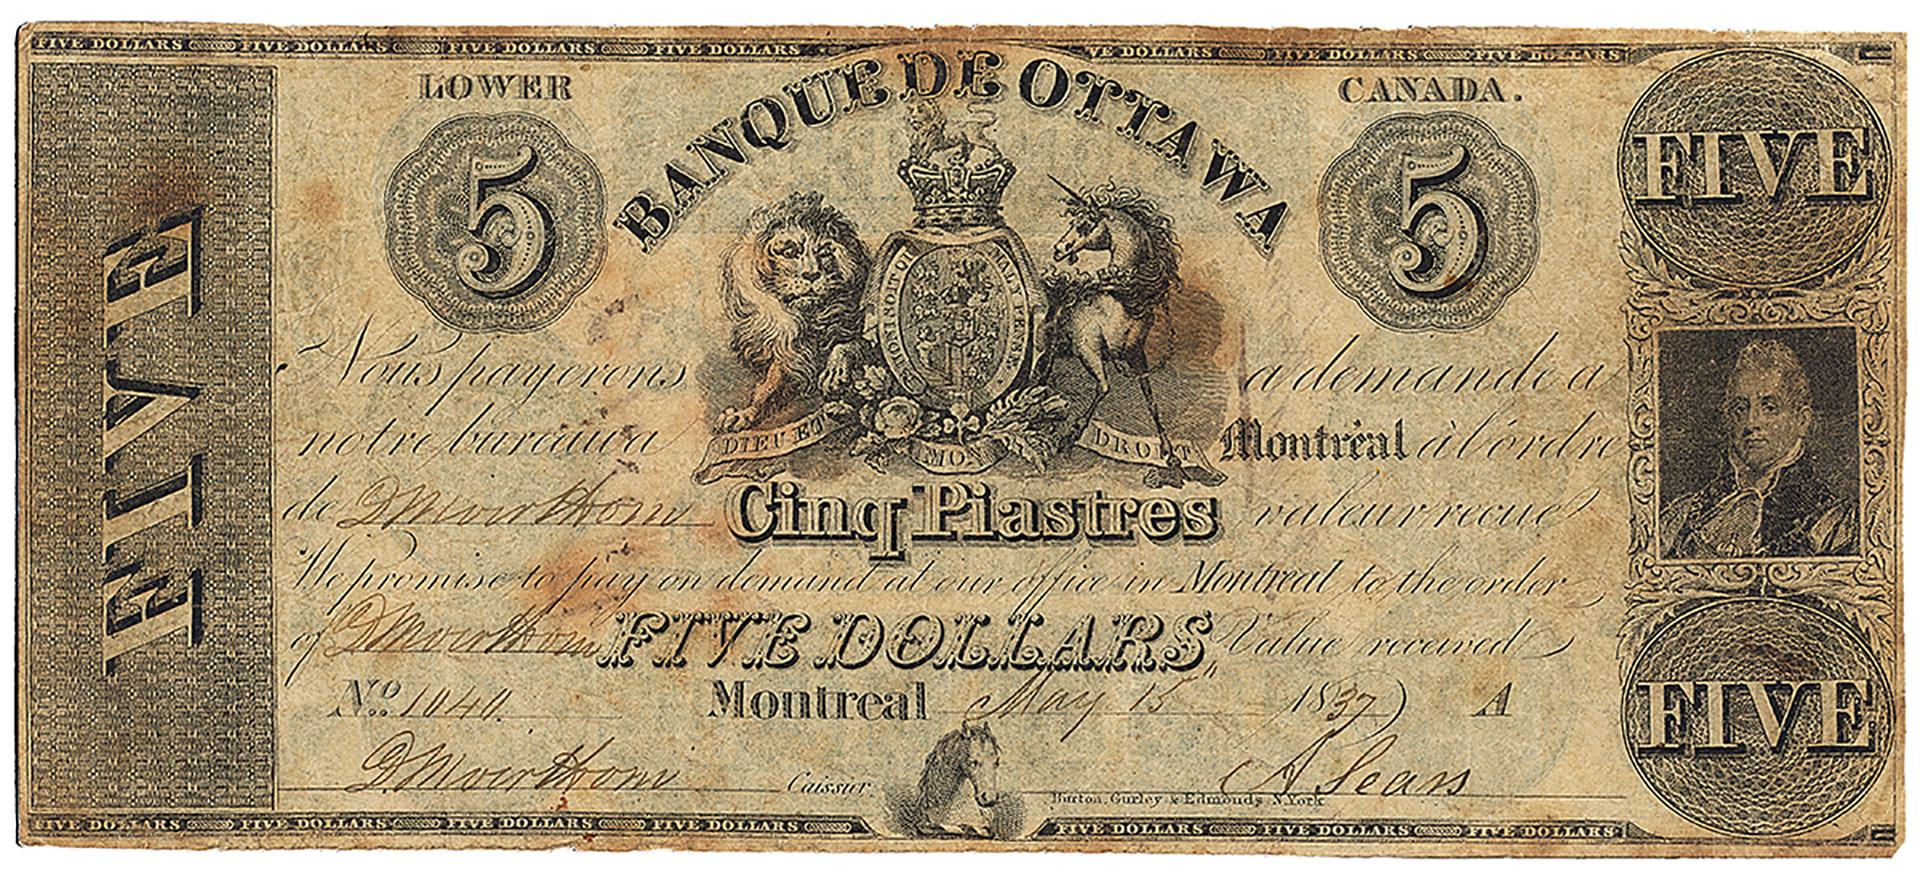 Bank note, old, yellowed, with faded black classical imagery and decorative printing.